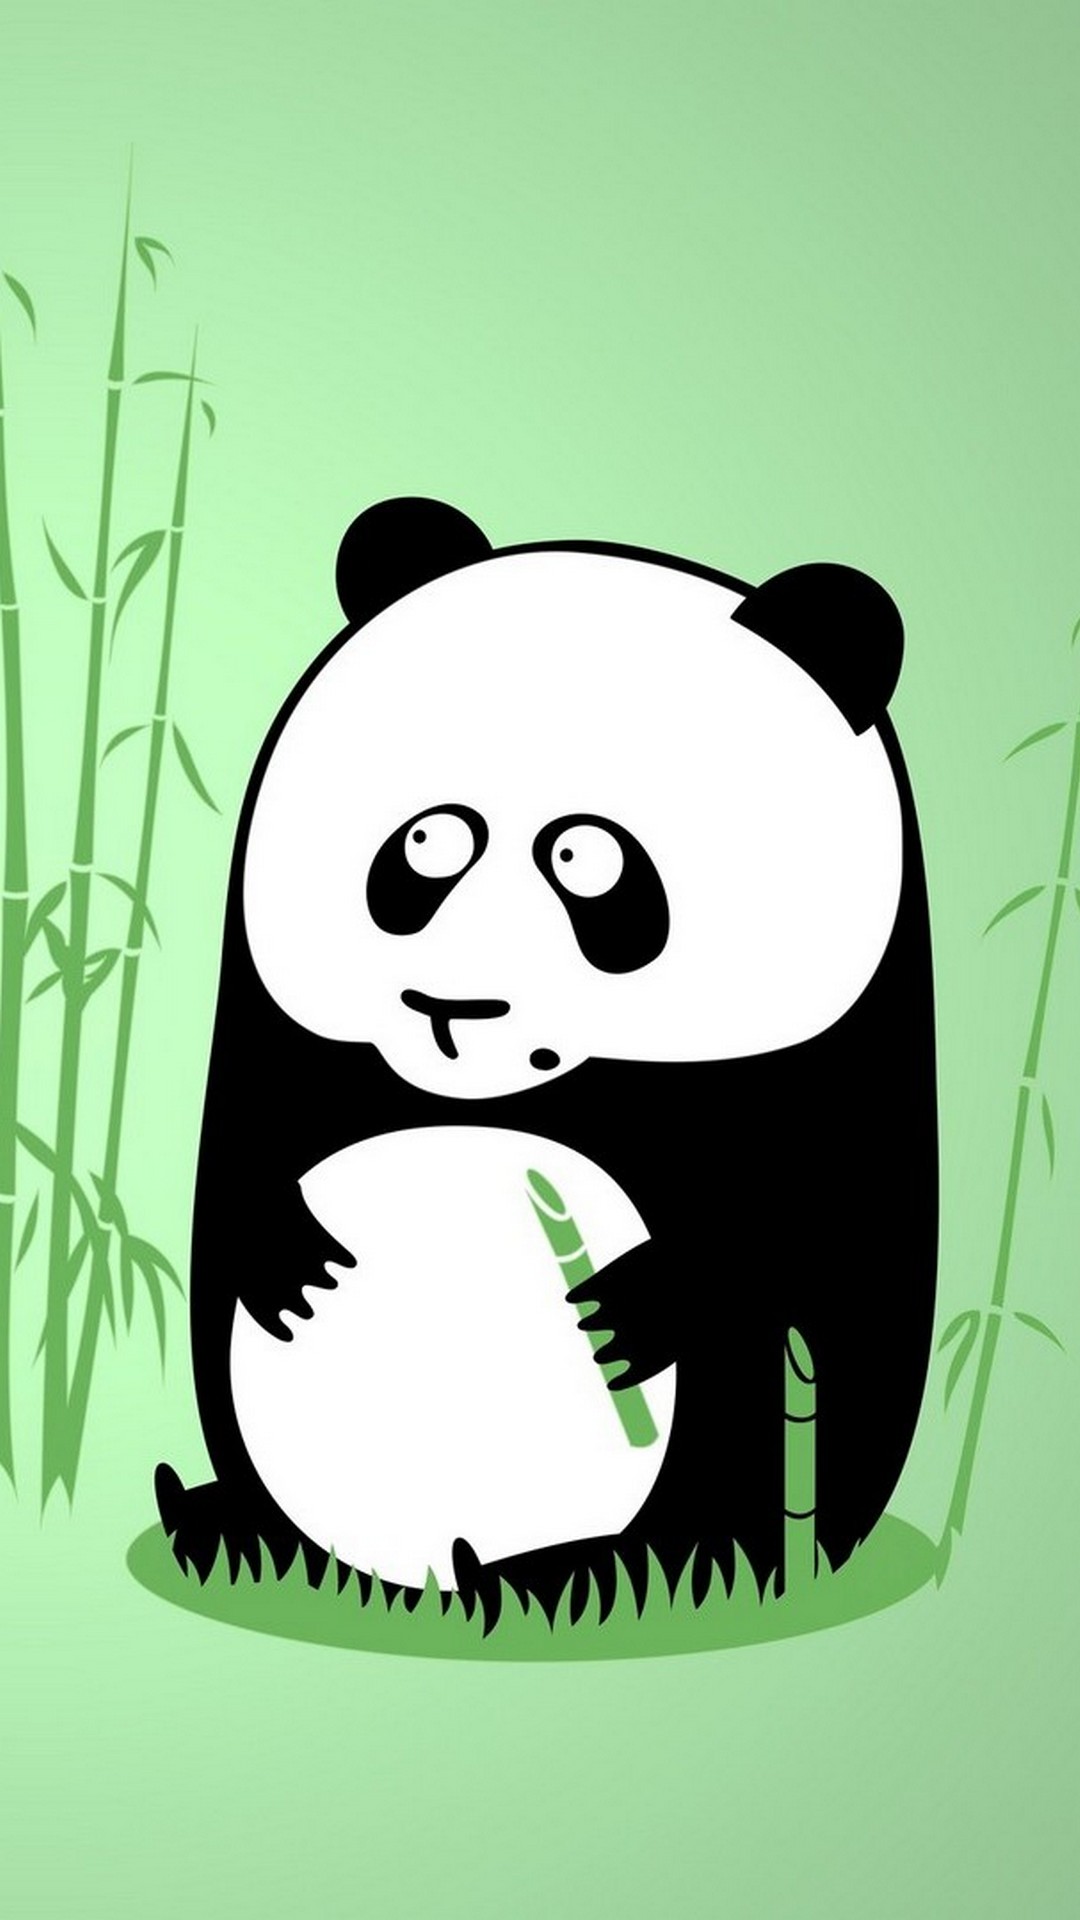 Wallpapers Cute Panda with HD resolution 1080x1920